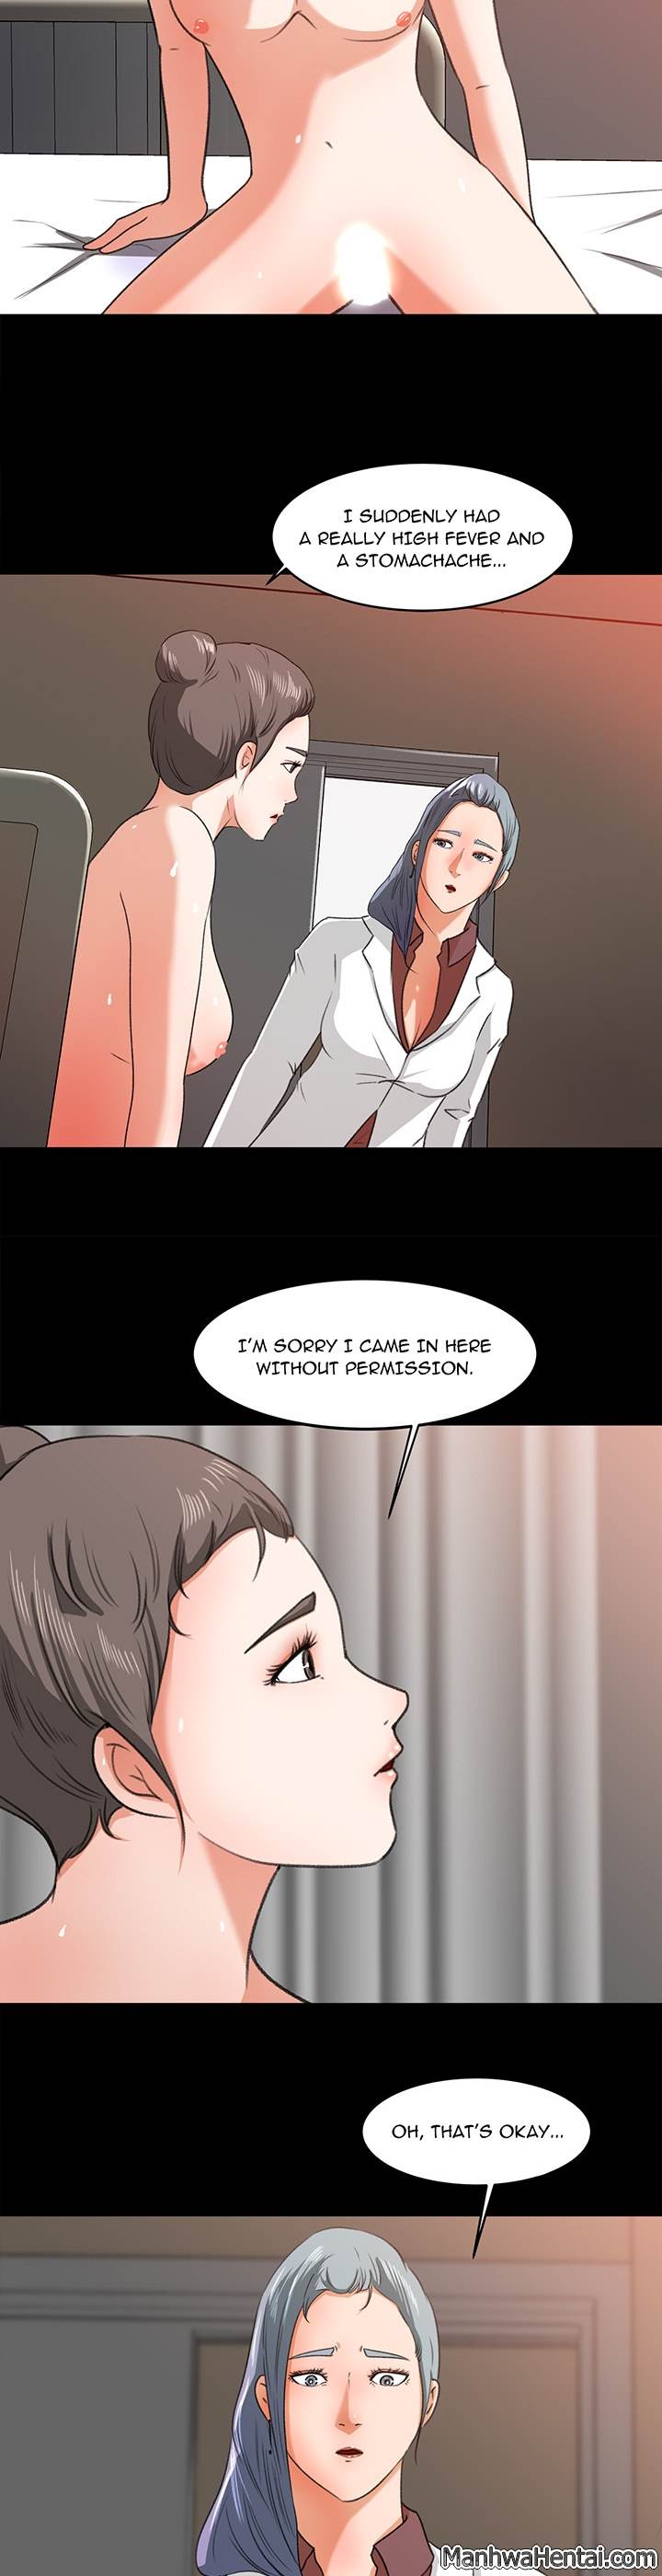 Inside the Uniform - Chapter 14 Page 12